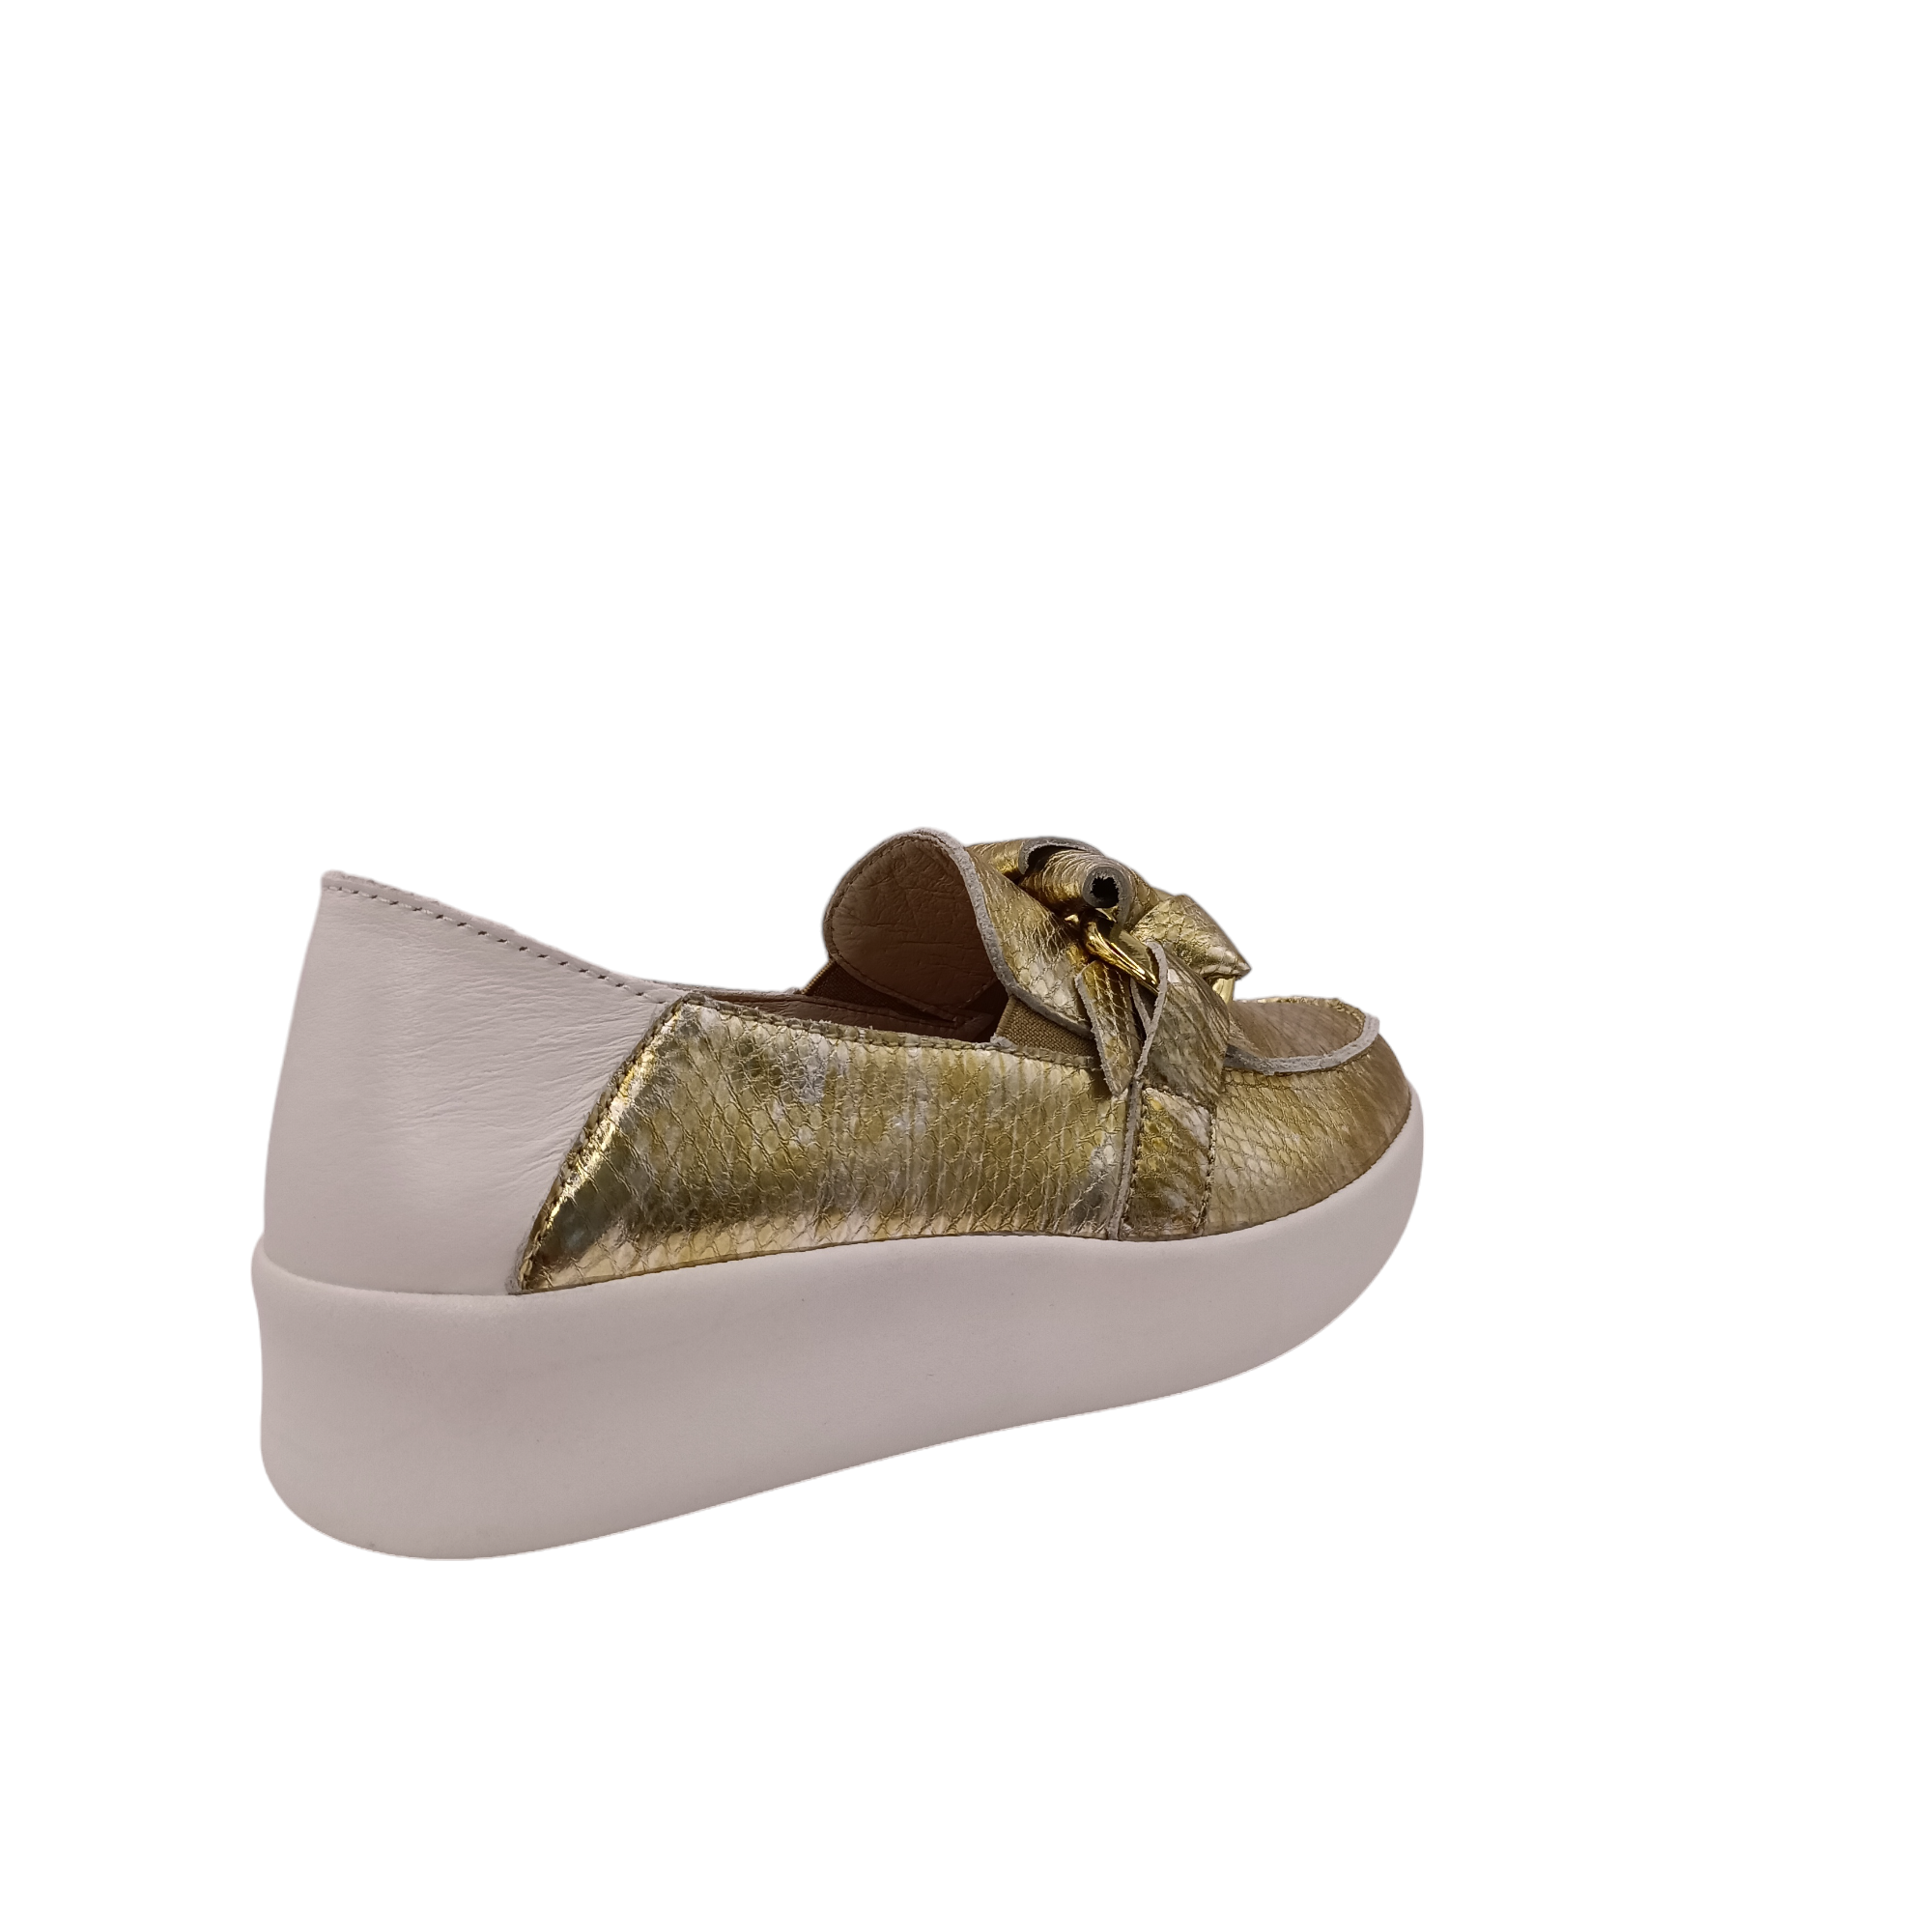 Heel view of gold snakeskin leather slip on shoe called mafia from Alfie &amp; Evie. Black leather laced in silver chain decorating the top, white leather heel with a white sole. Shop Alfie &amp; Evie Womens Shoes online and In-Store with shoe&amp;me Mount Maunganui.